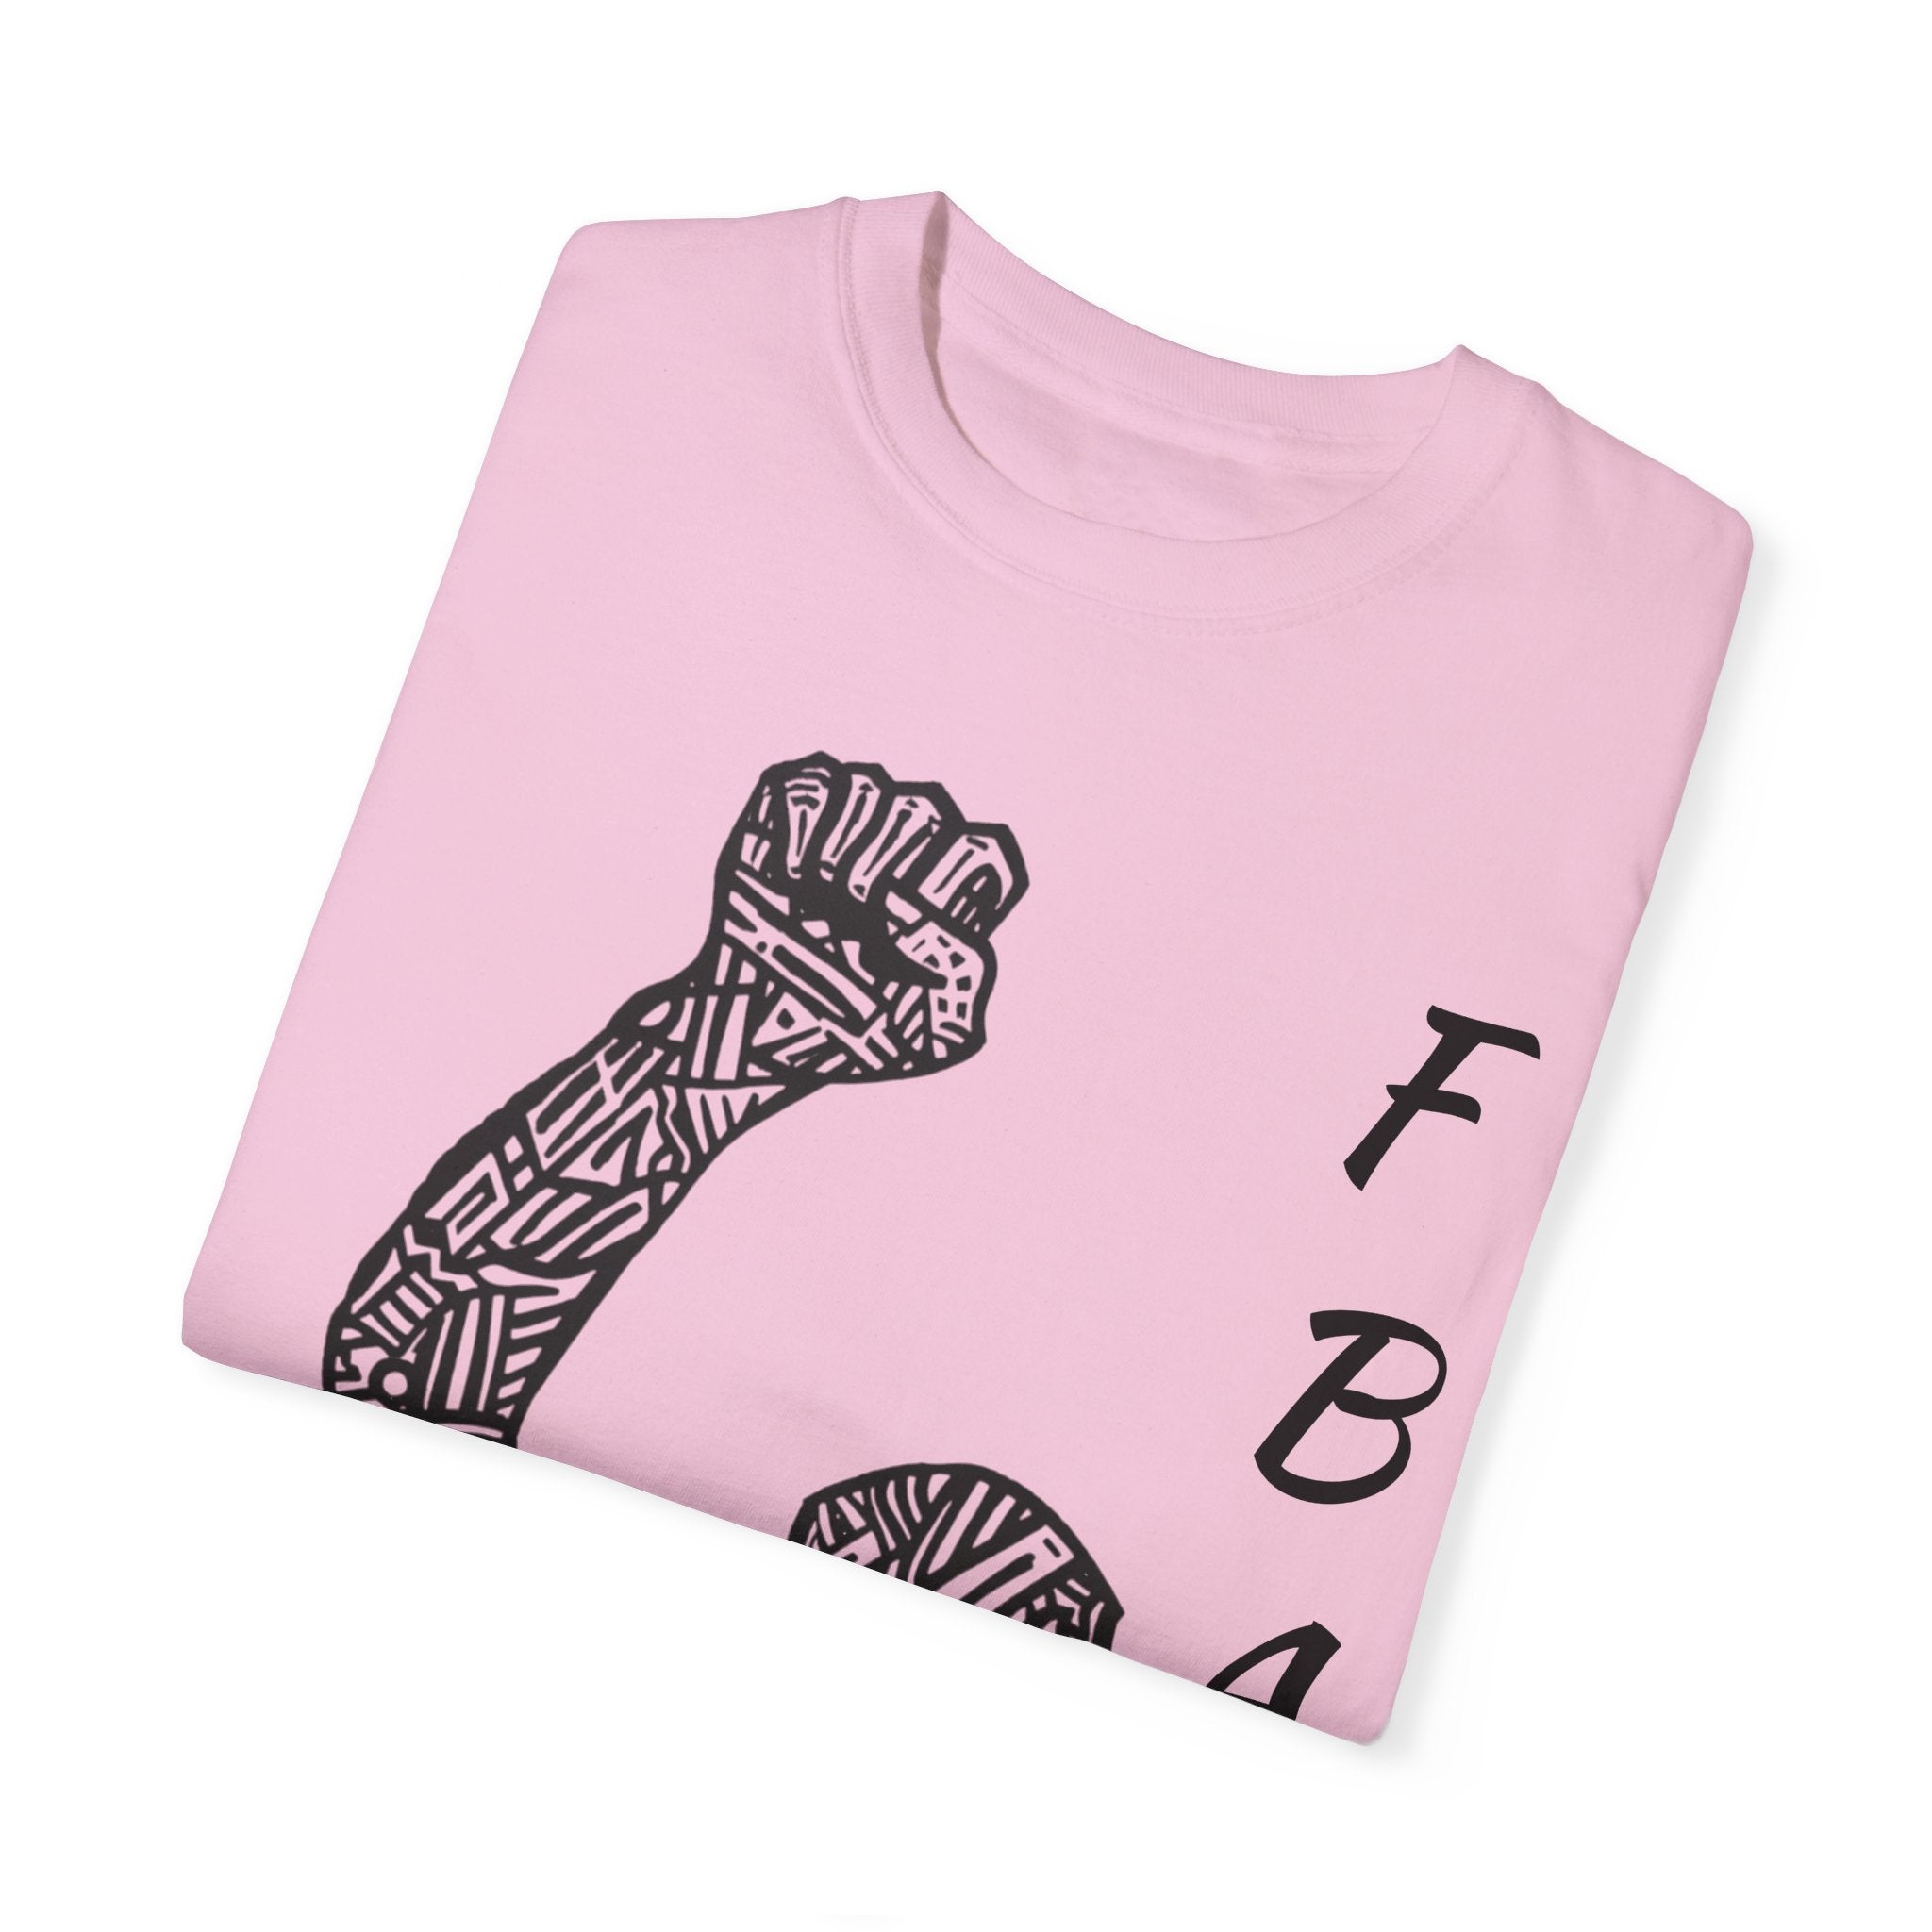 Rise in Unity: FBA Fist Rise Silhouette Unisex Garment-Dyed T-Shirt - Empowerment Through Heritage